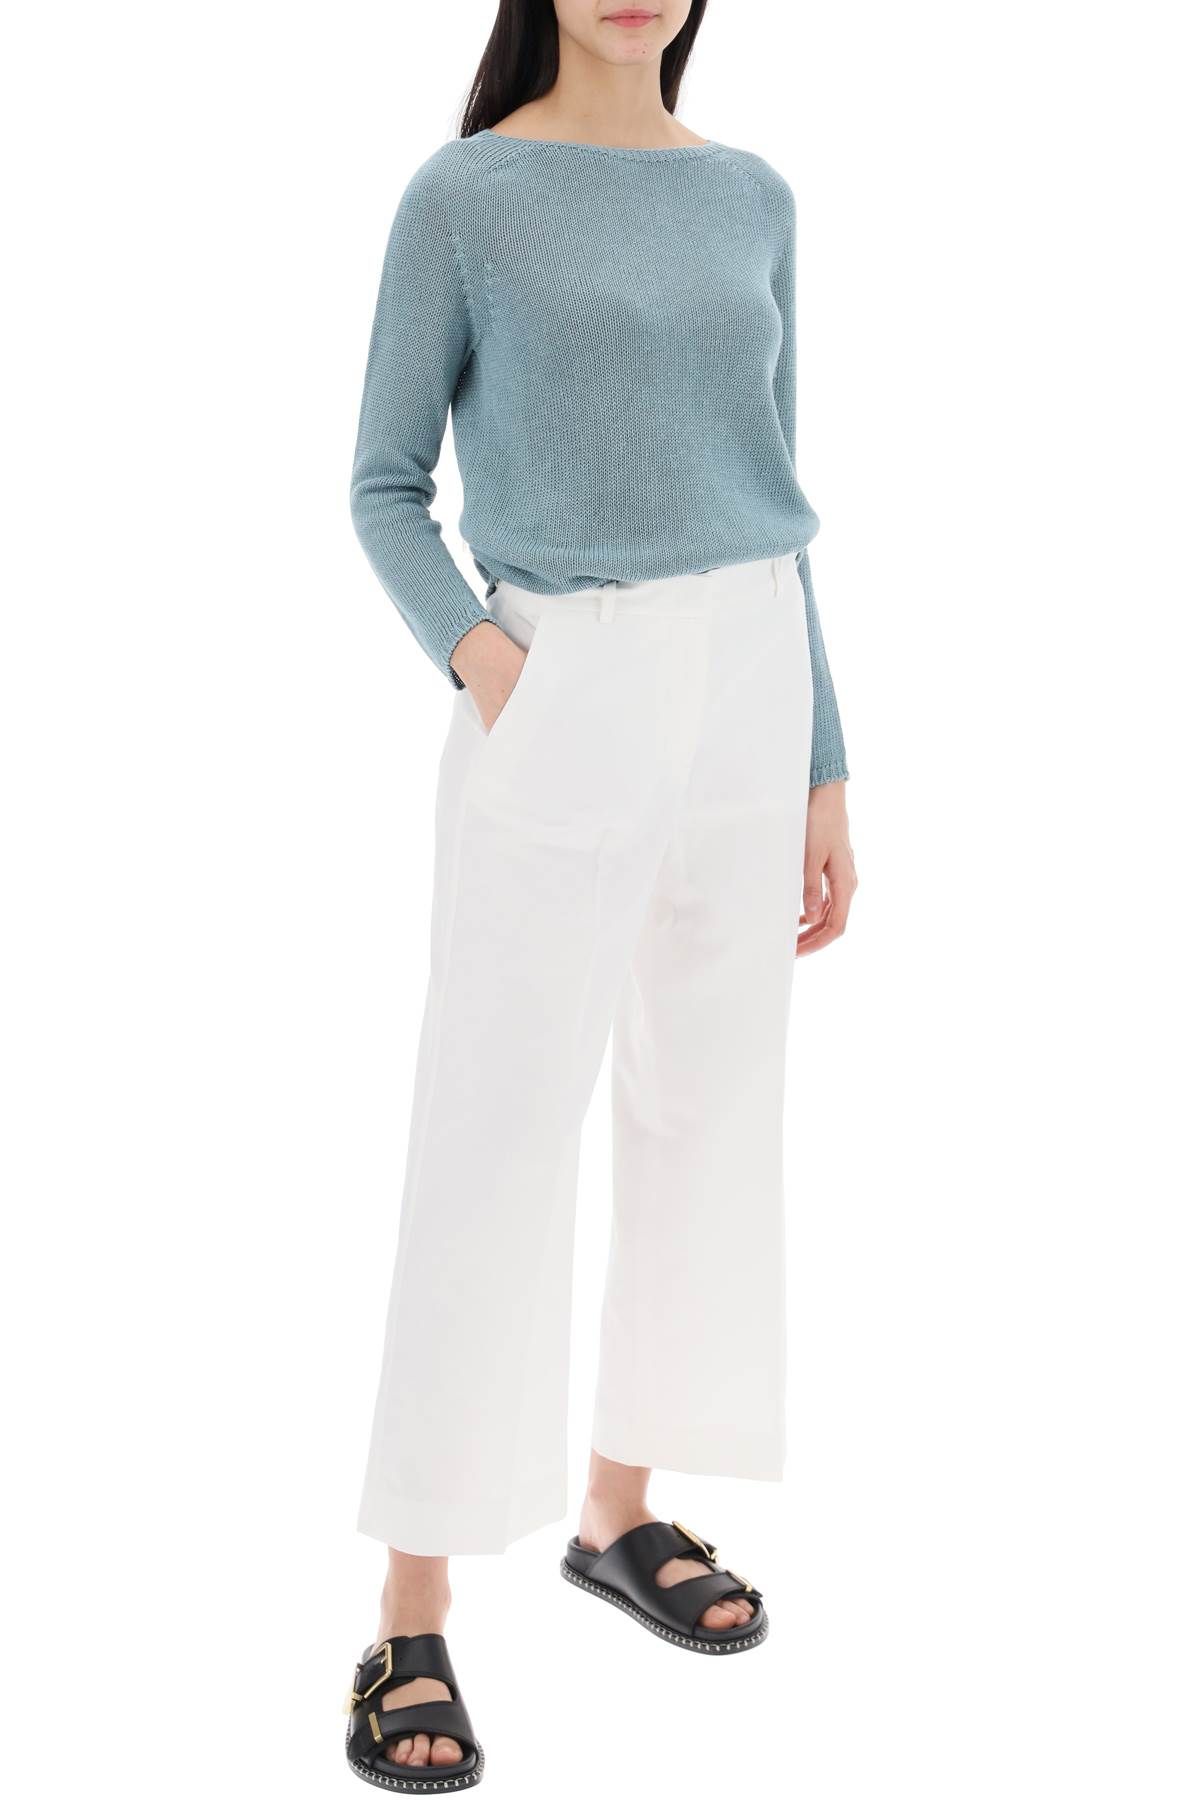 Shop 's Max Mara Lightweight Linen Knit Pullover By Giol In Light Blue